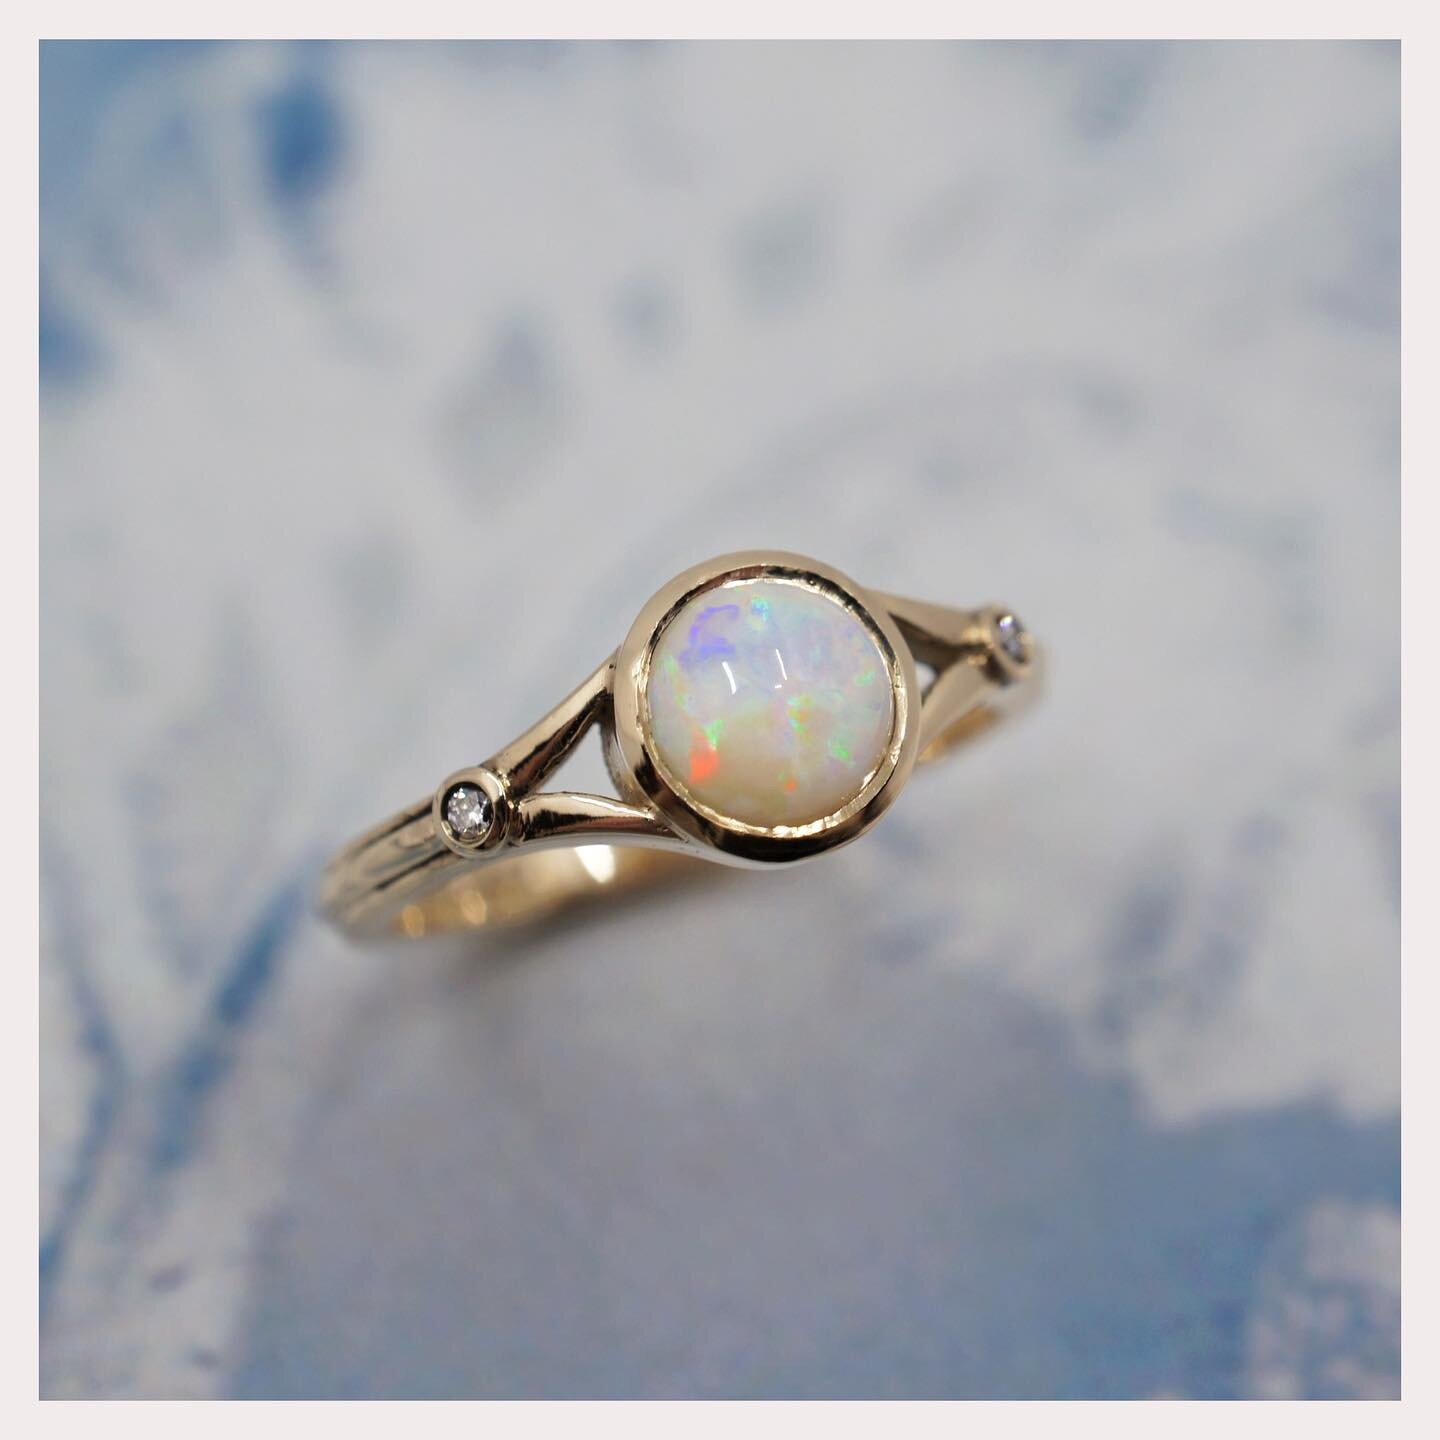 Gold Opal ring re-model ✨

We took inspiration from the original ring design, but modernised it, set the Opal lower and added a few cheeky diamonds. 

Swipe to see the before -&gt; 

#opalring #recycledgold #remodelledjewellery #reworkedjewellery #re